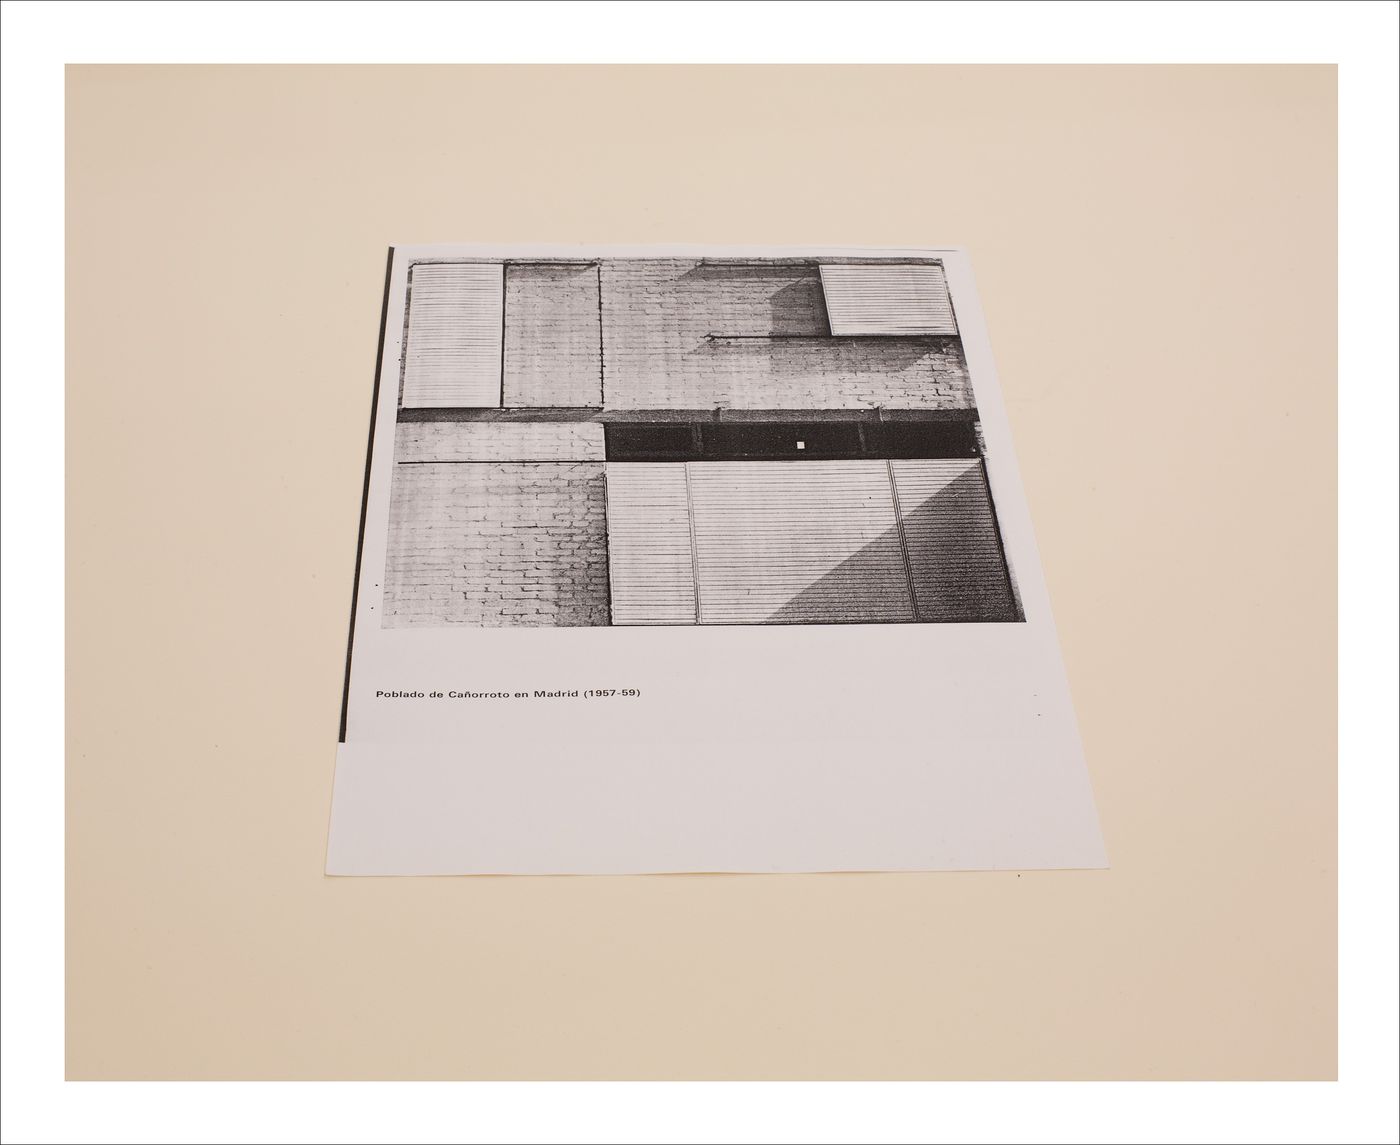 Proofs of Relevance: View of a reference document for the residential prototype Vivienda AH Gia, Abalos & Herreros (1993-1996)